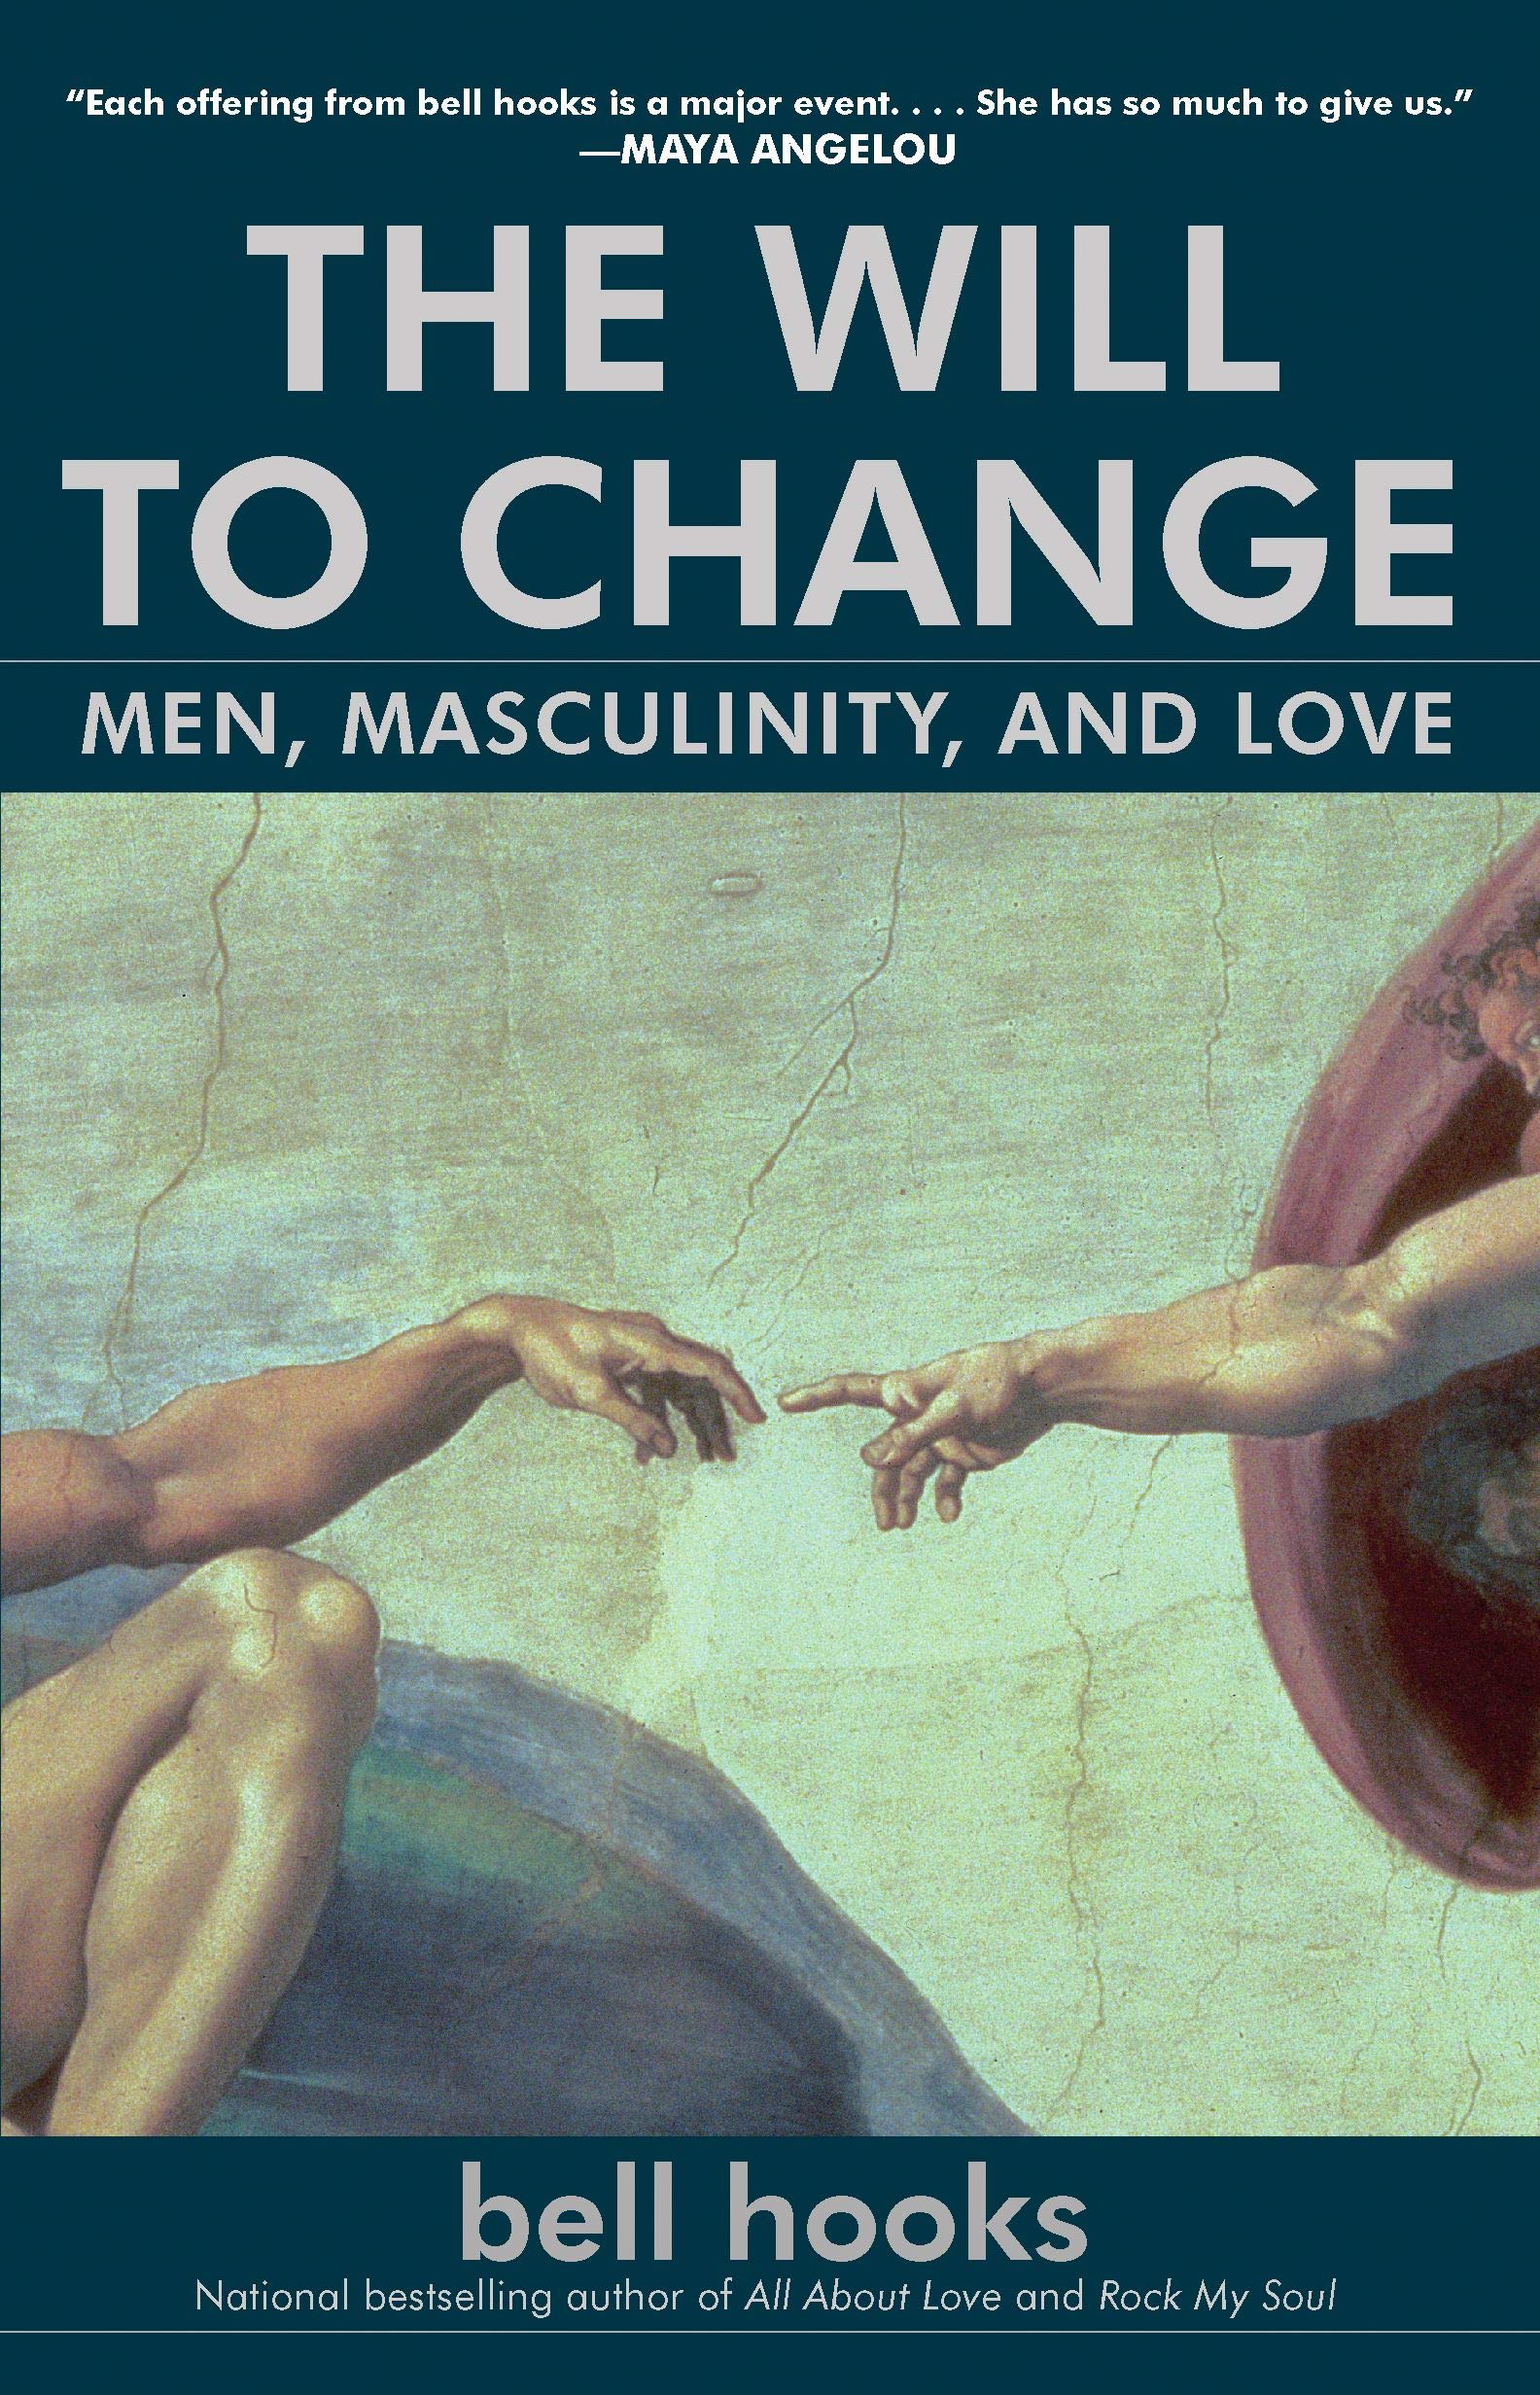 Gavin McGimpsey's top book recommendation: The Will to Change, by bell hooks